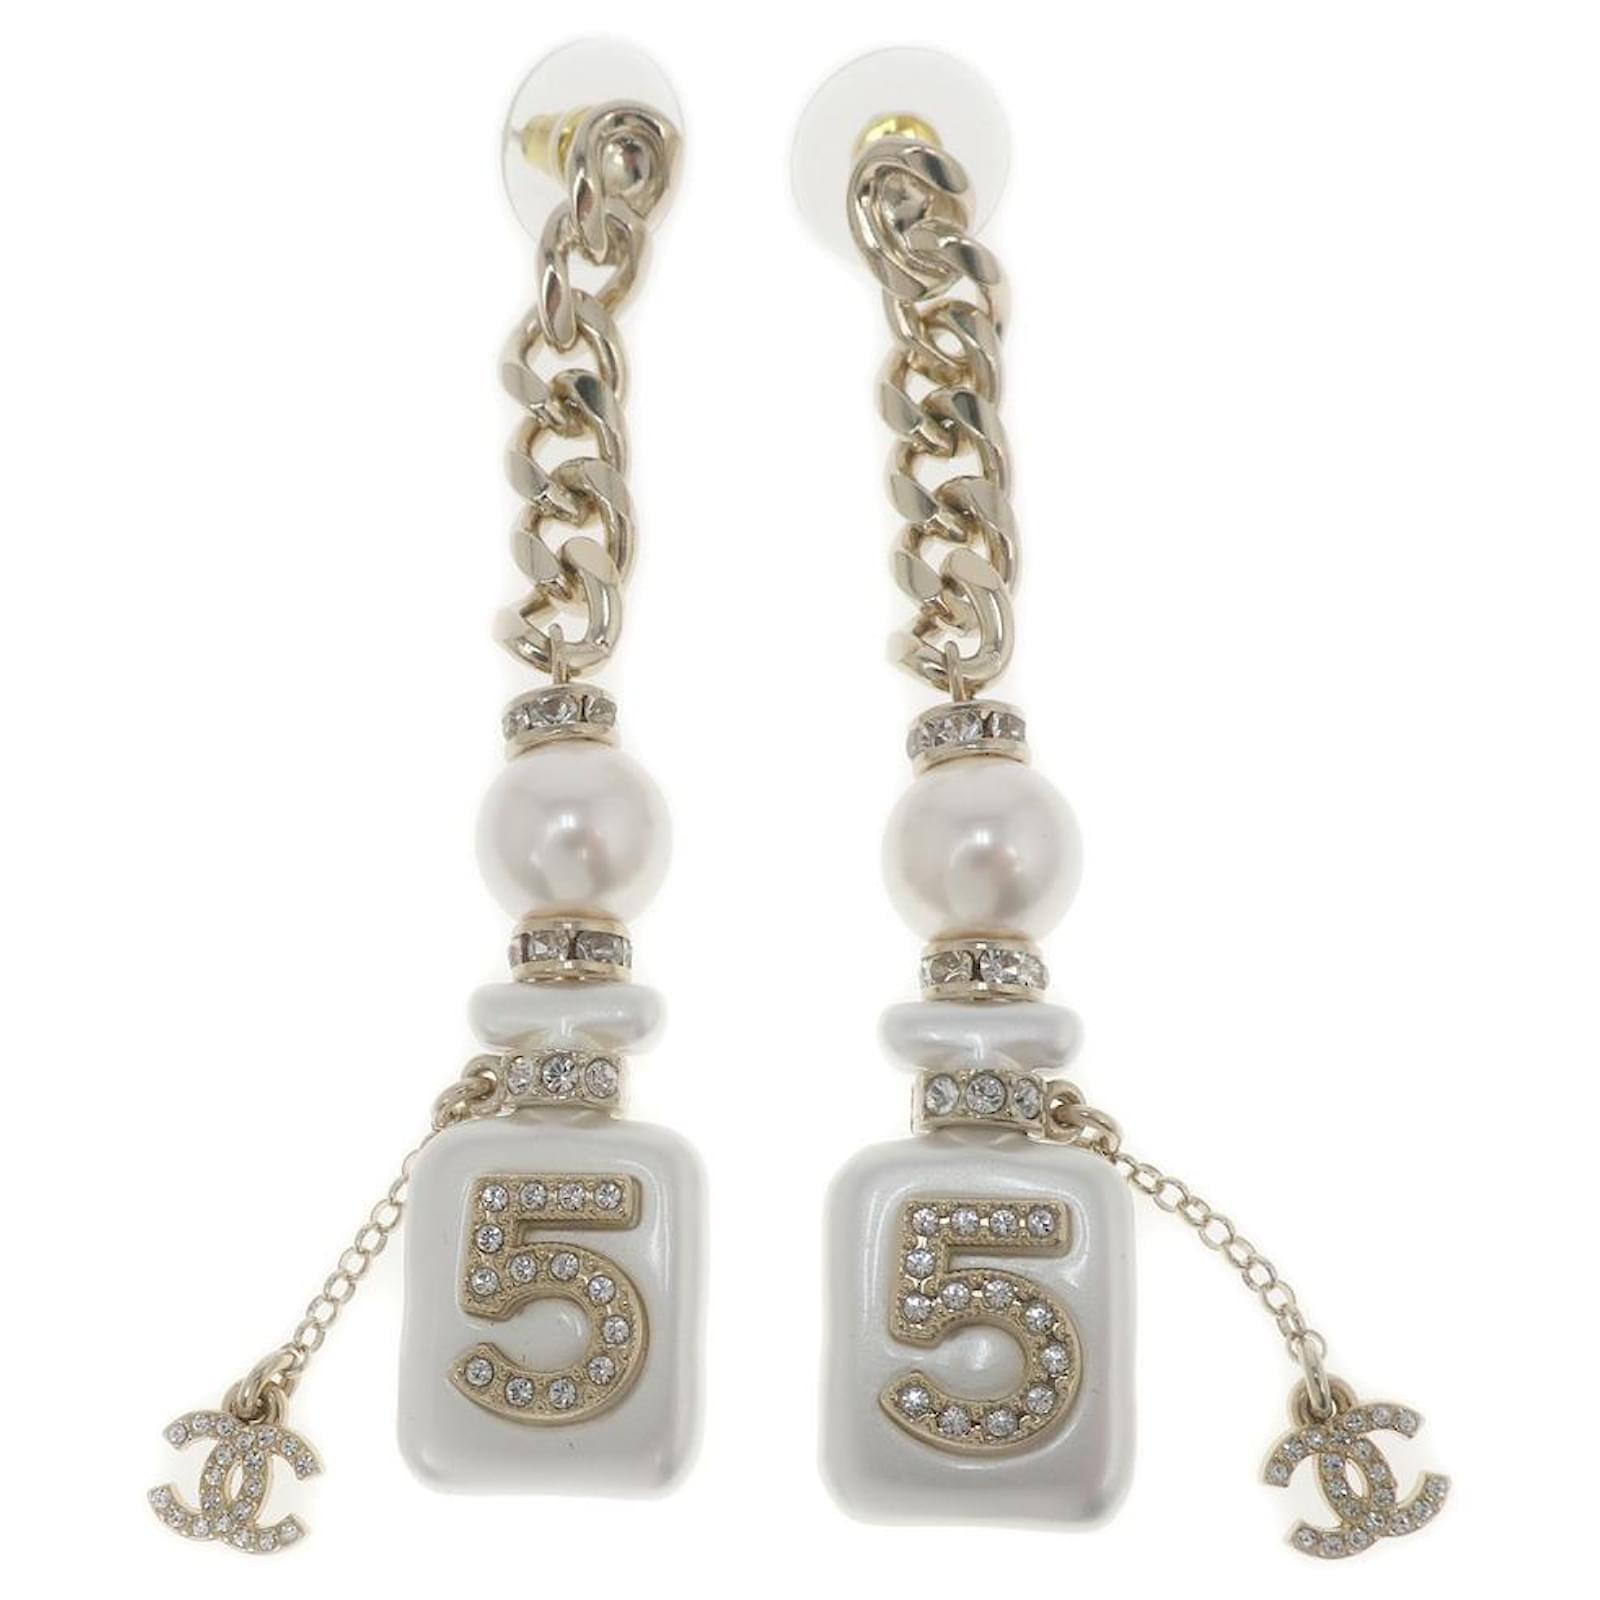 Chanel Earrings No.5 Cocomark CC Mark Gold x White Jewelry Golden